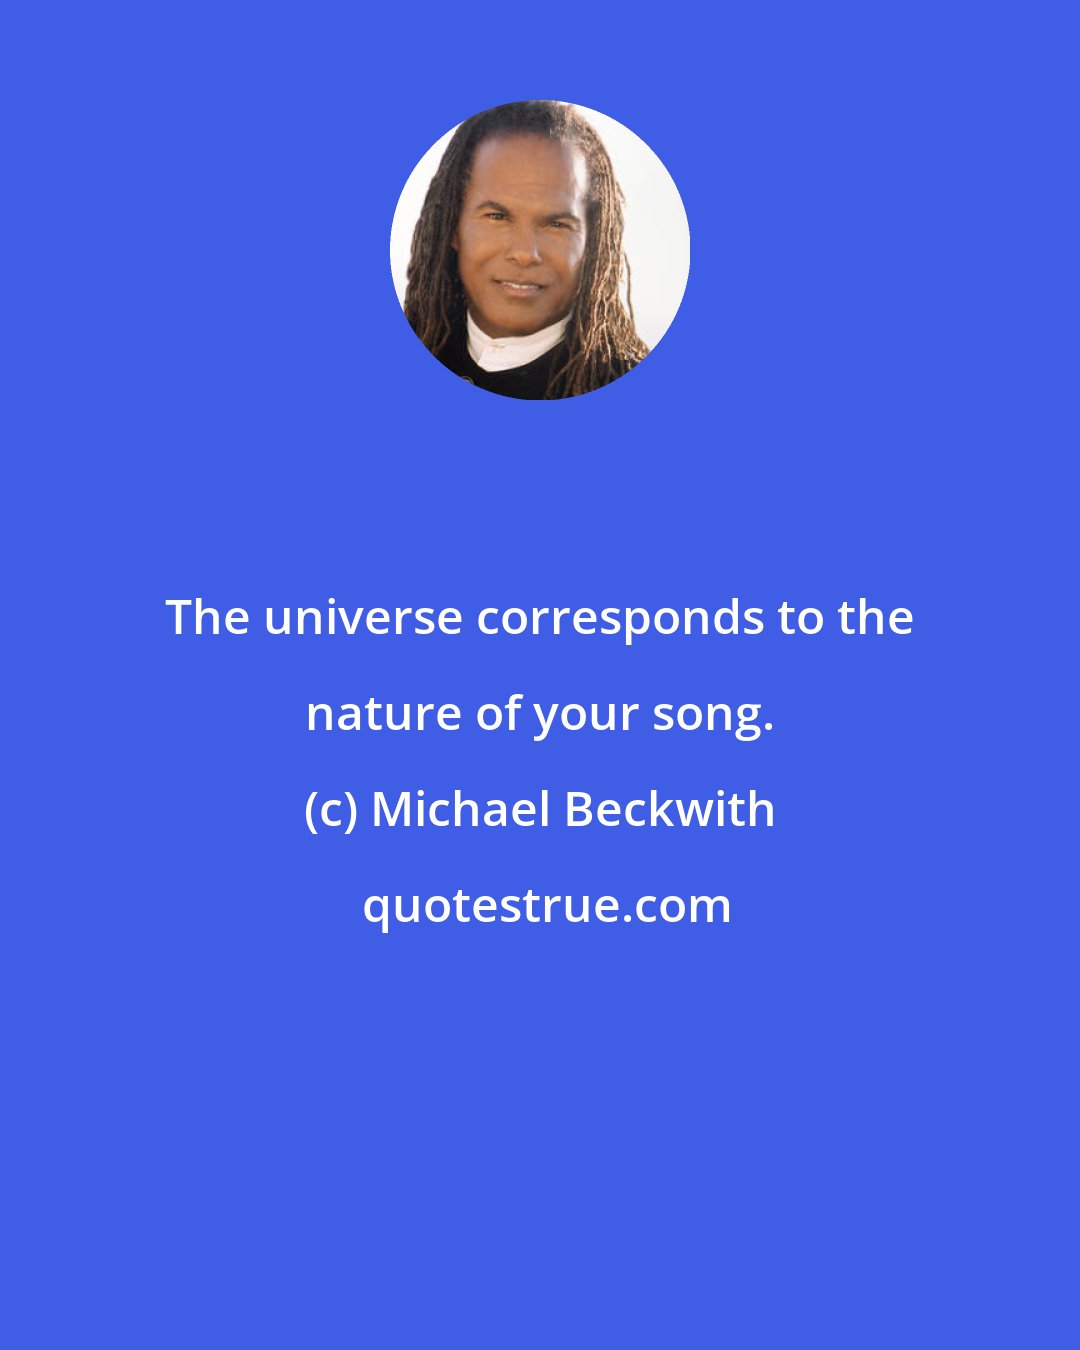 Michael Beckwith: The universe corresponds to the nature of your song.